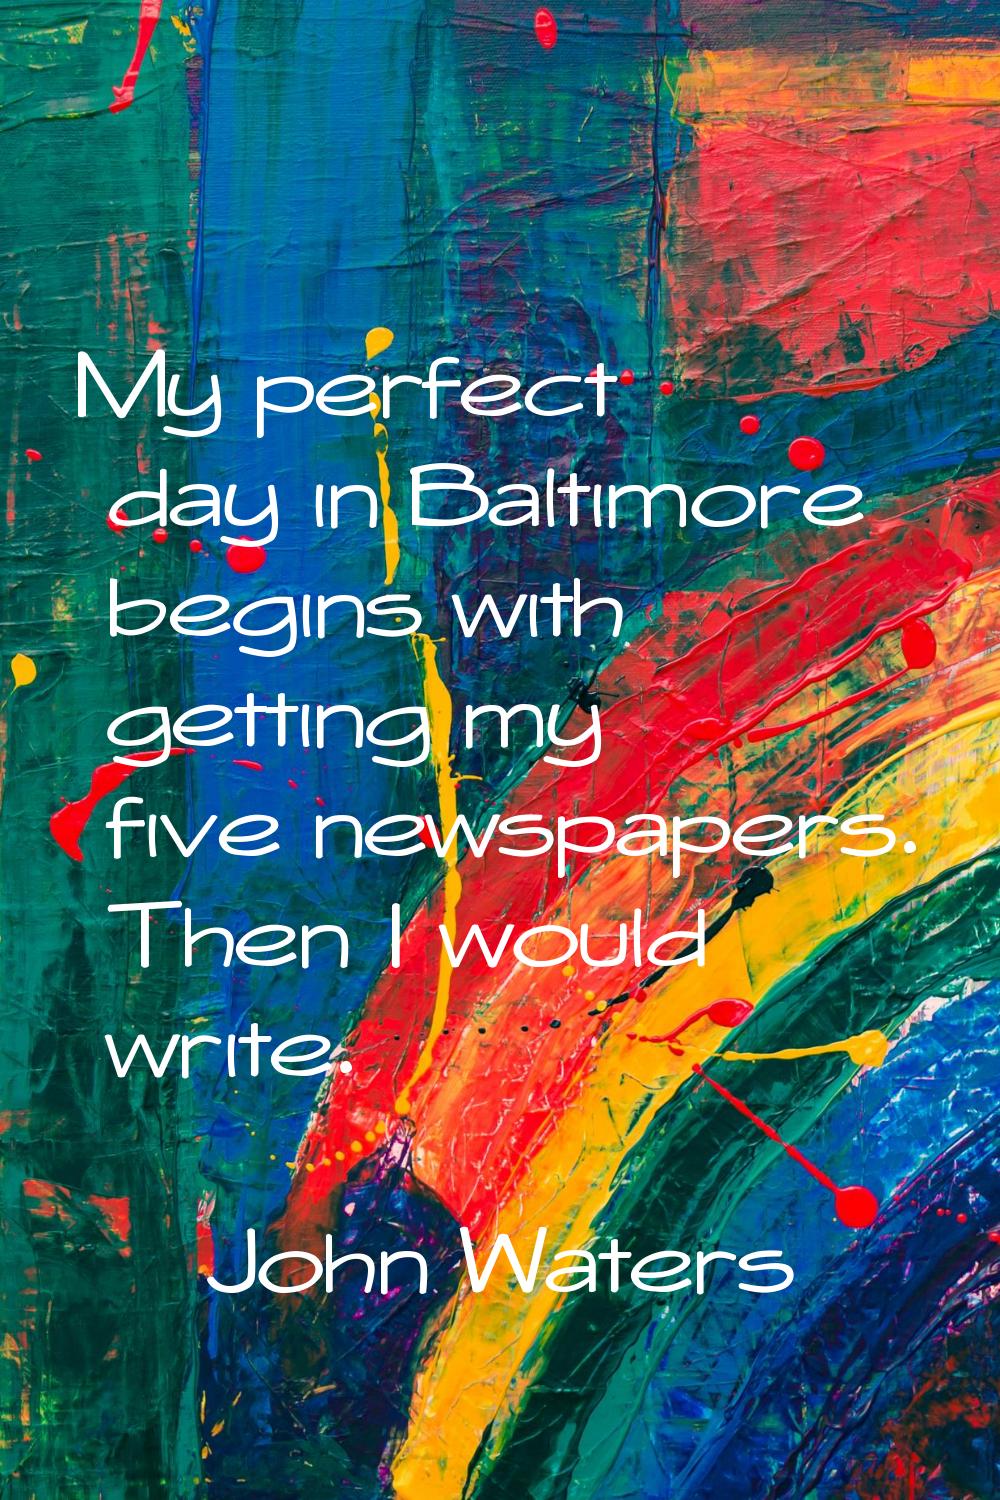 My perfect day in Baltimore begins with getting my five newspapers. Then I would write.